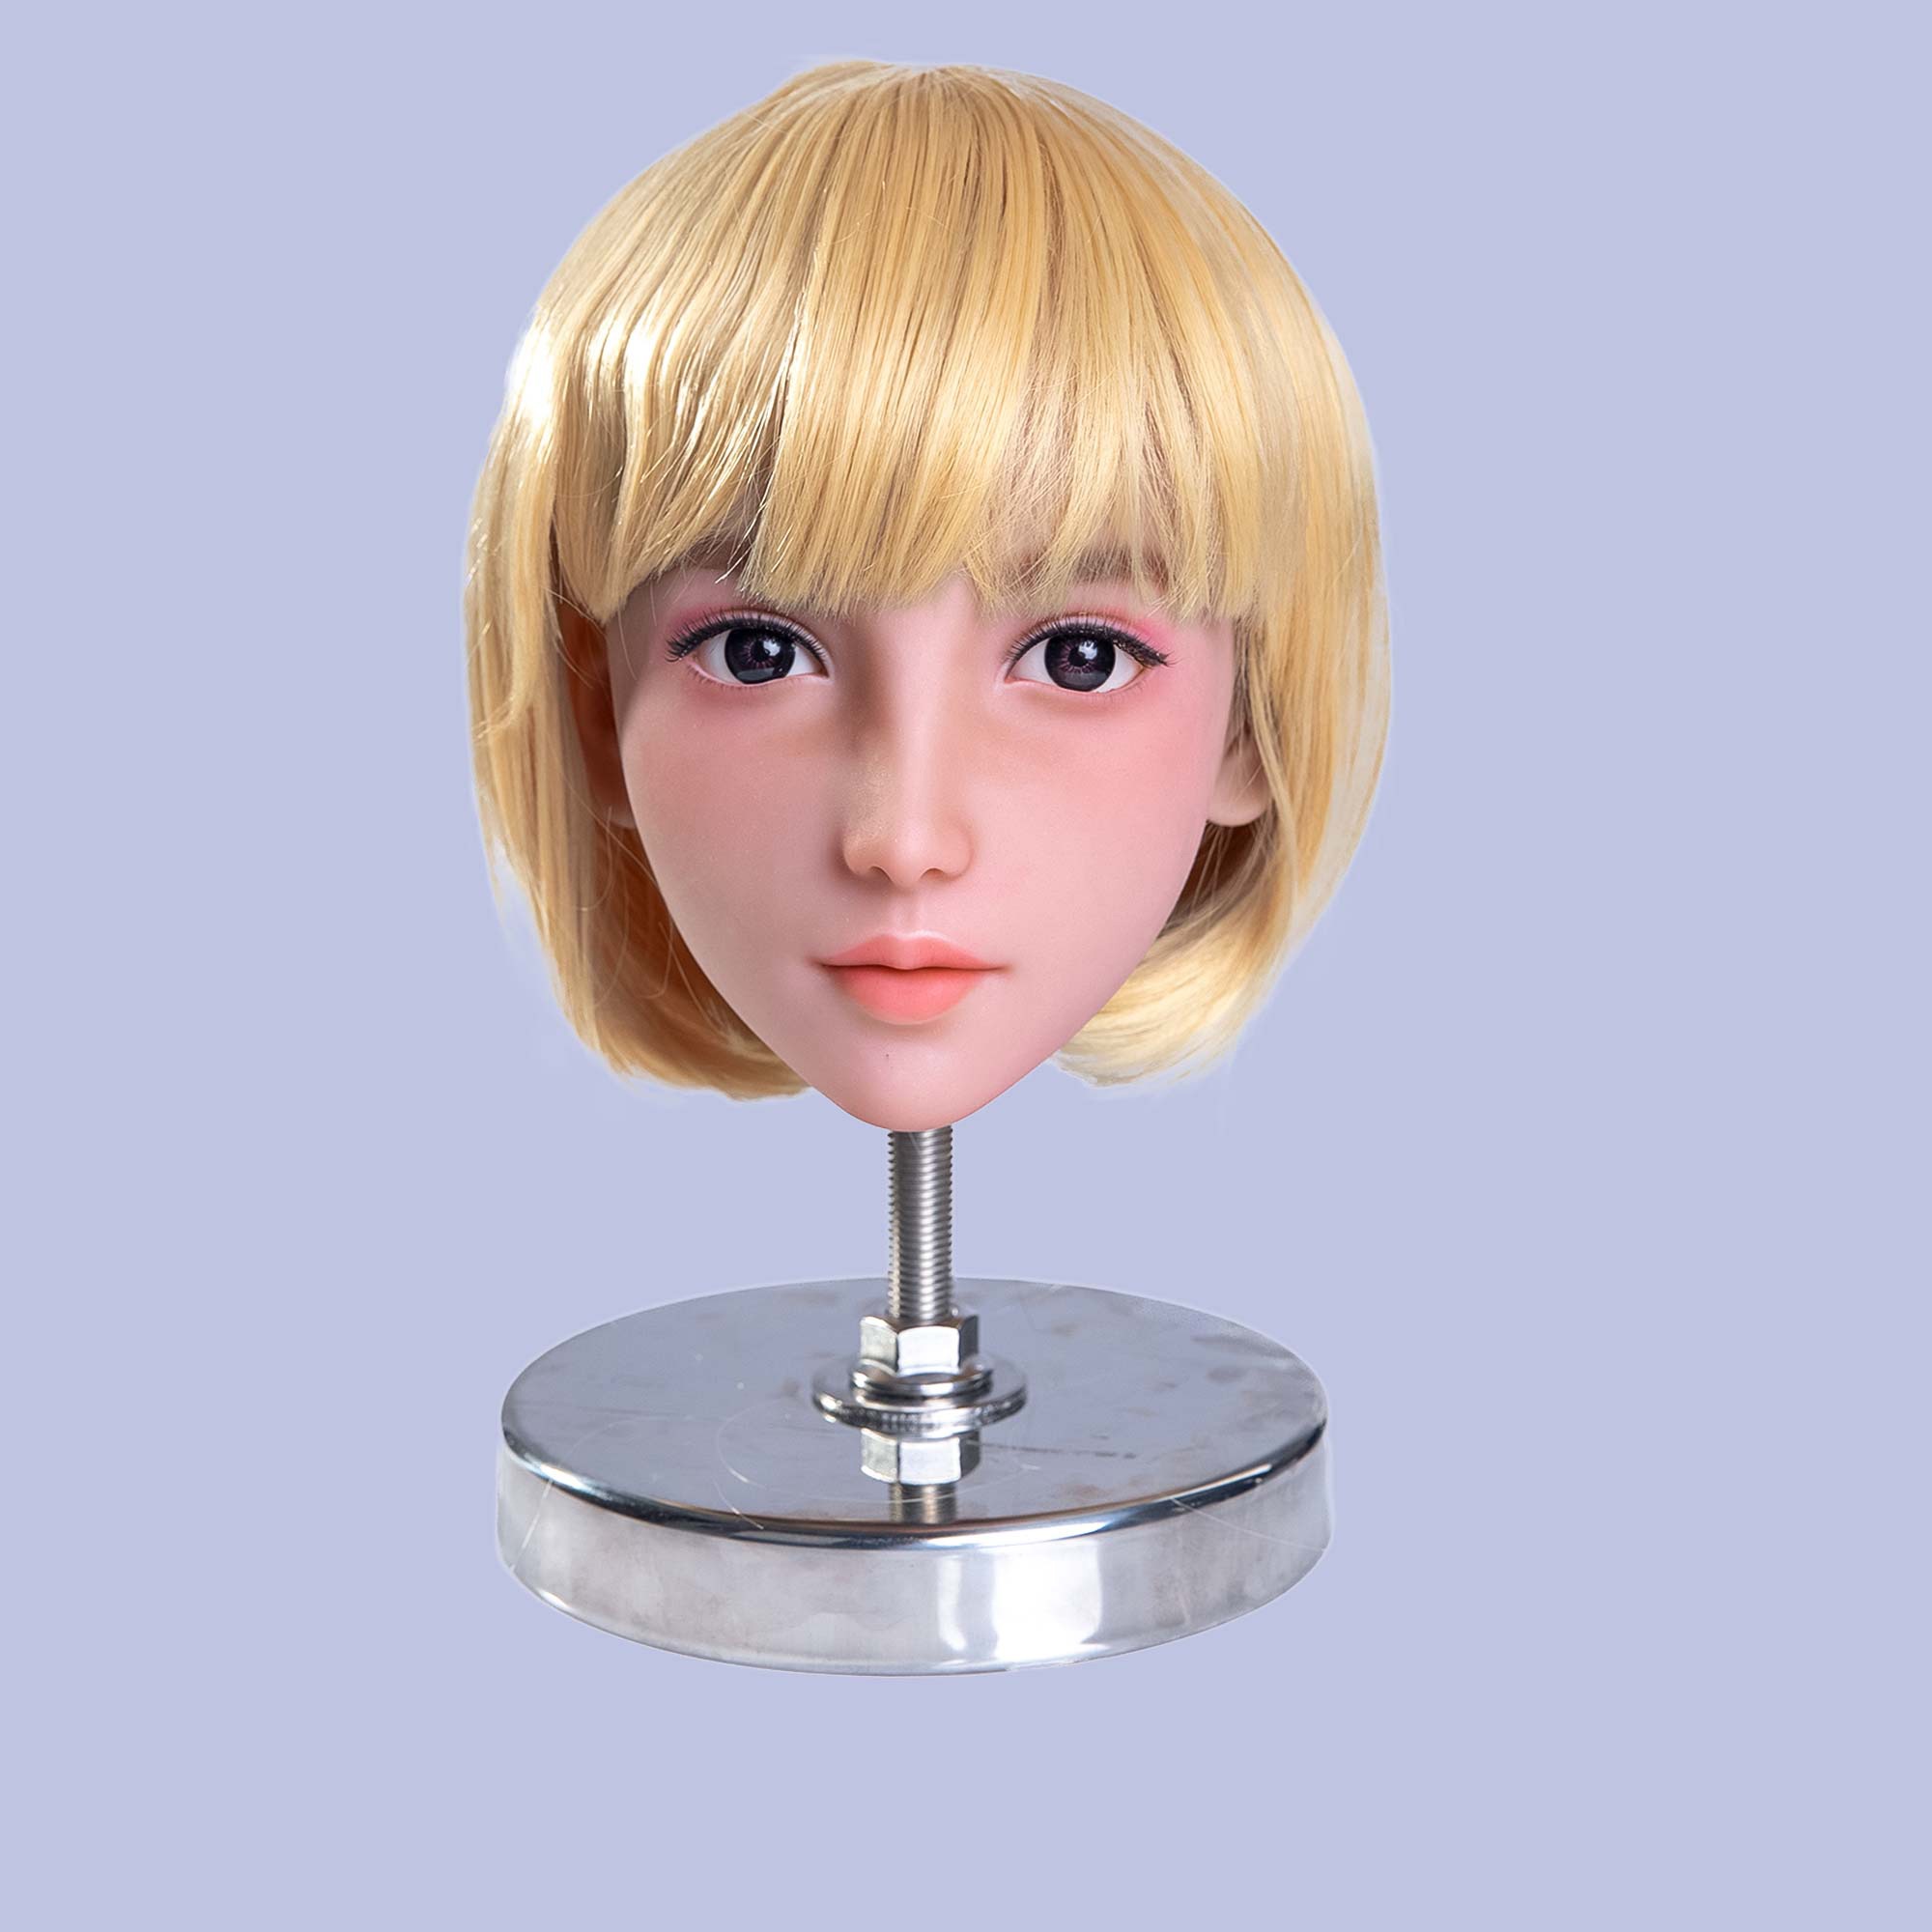 Sex Doll Wig 13 Sedoll Brand Official Site